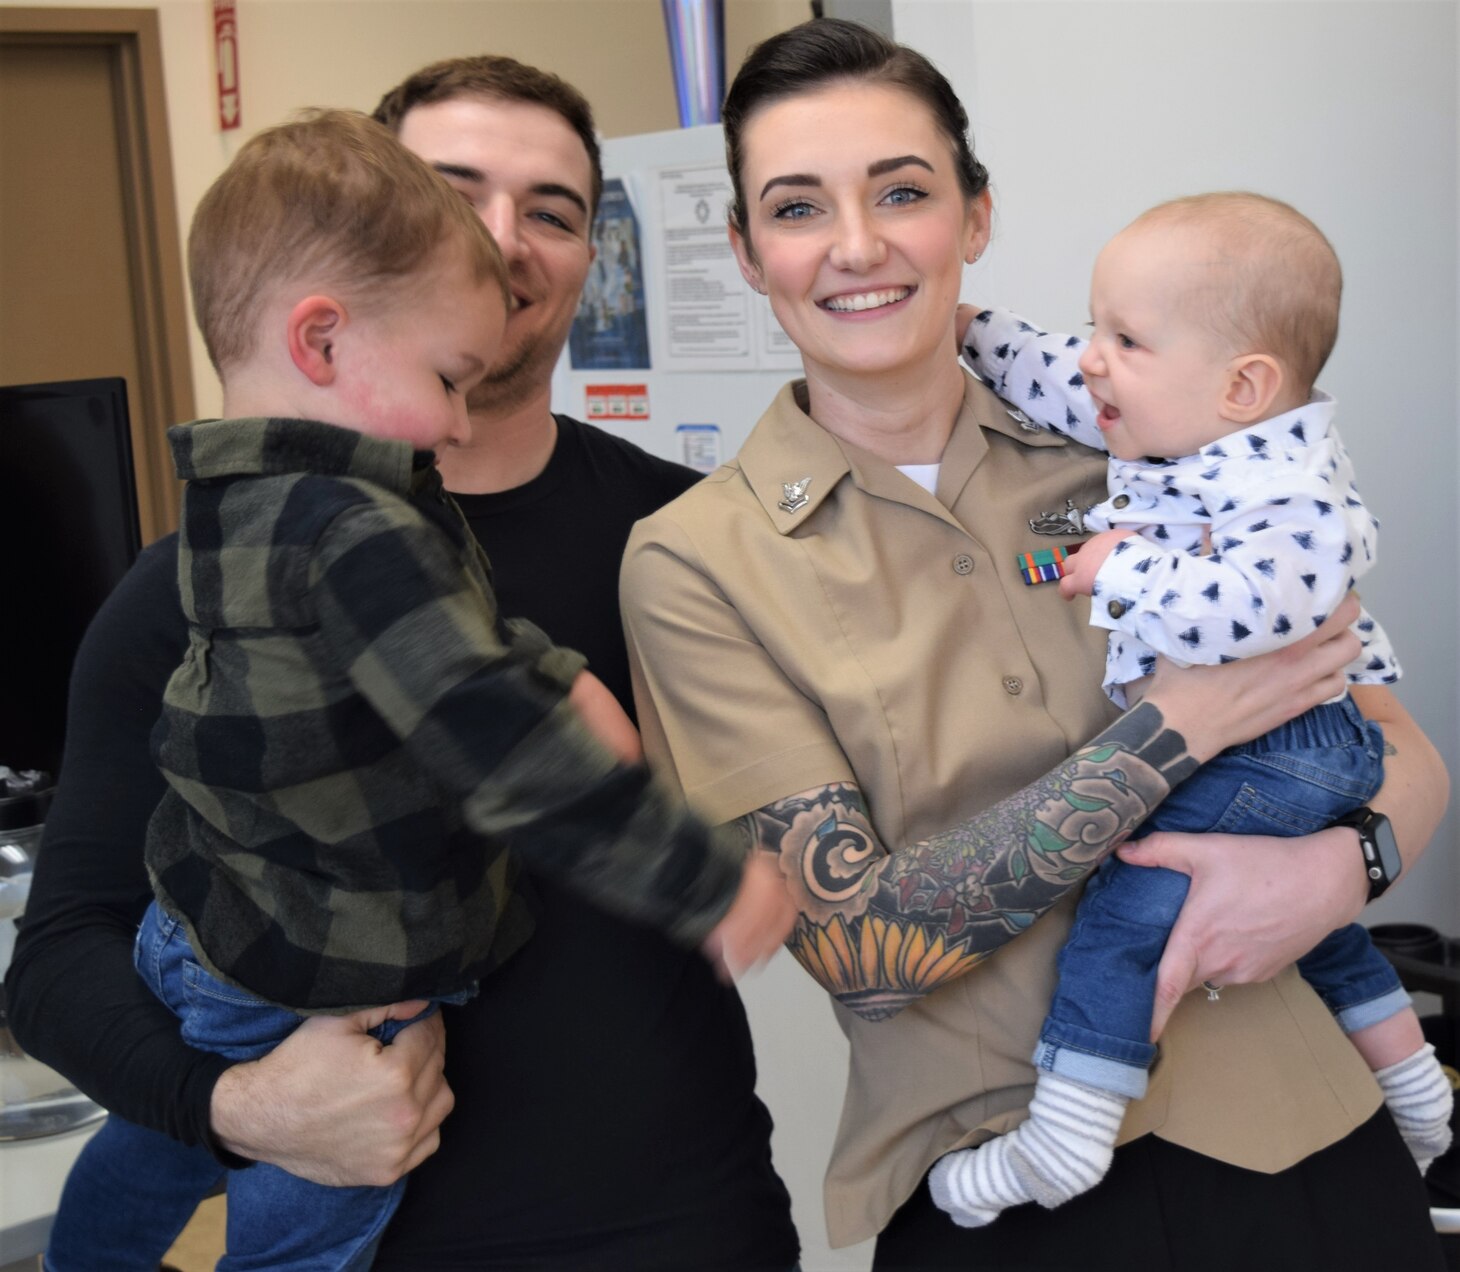 An Army and Navy family affair… Hospital Corpsman 2nd Class Ashley Painter is joined by husband Will and their two young sons for a photo-opportunity after her ceremoniously promotion to her current rank at Naval Hospital Bremerton (Official Navy photo by Douglas H Stutz, NHB/NMRTC Bremerton public affairs officer).